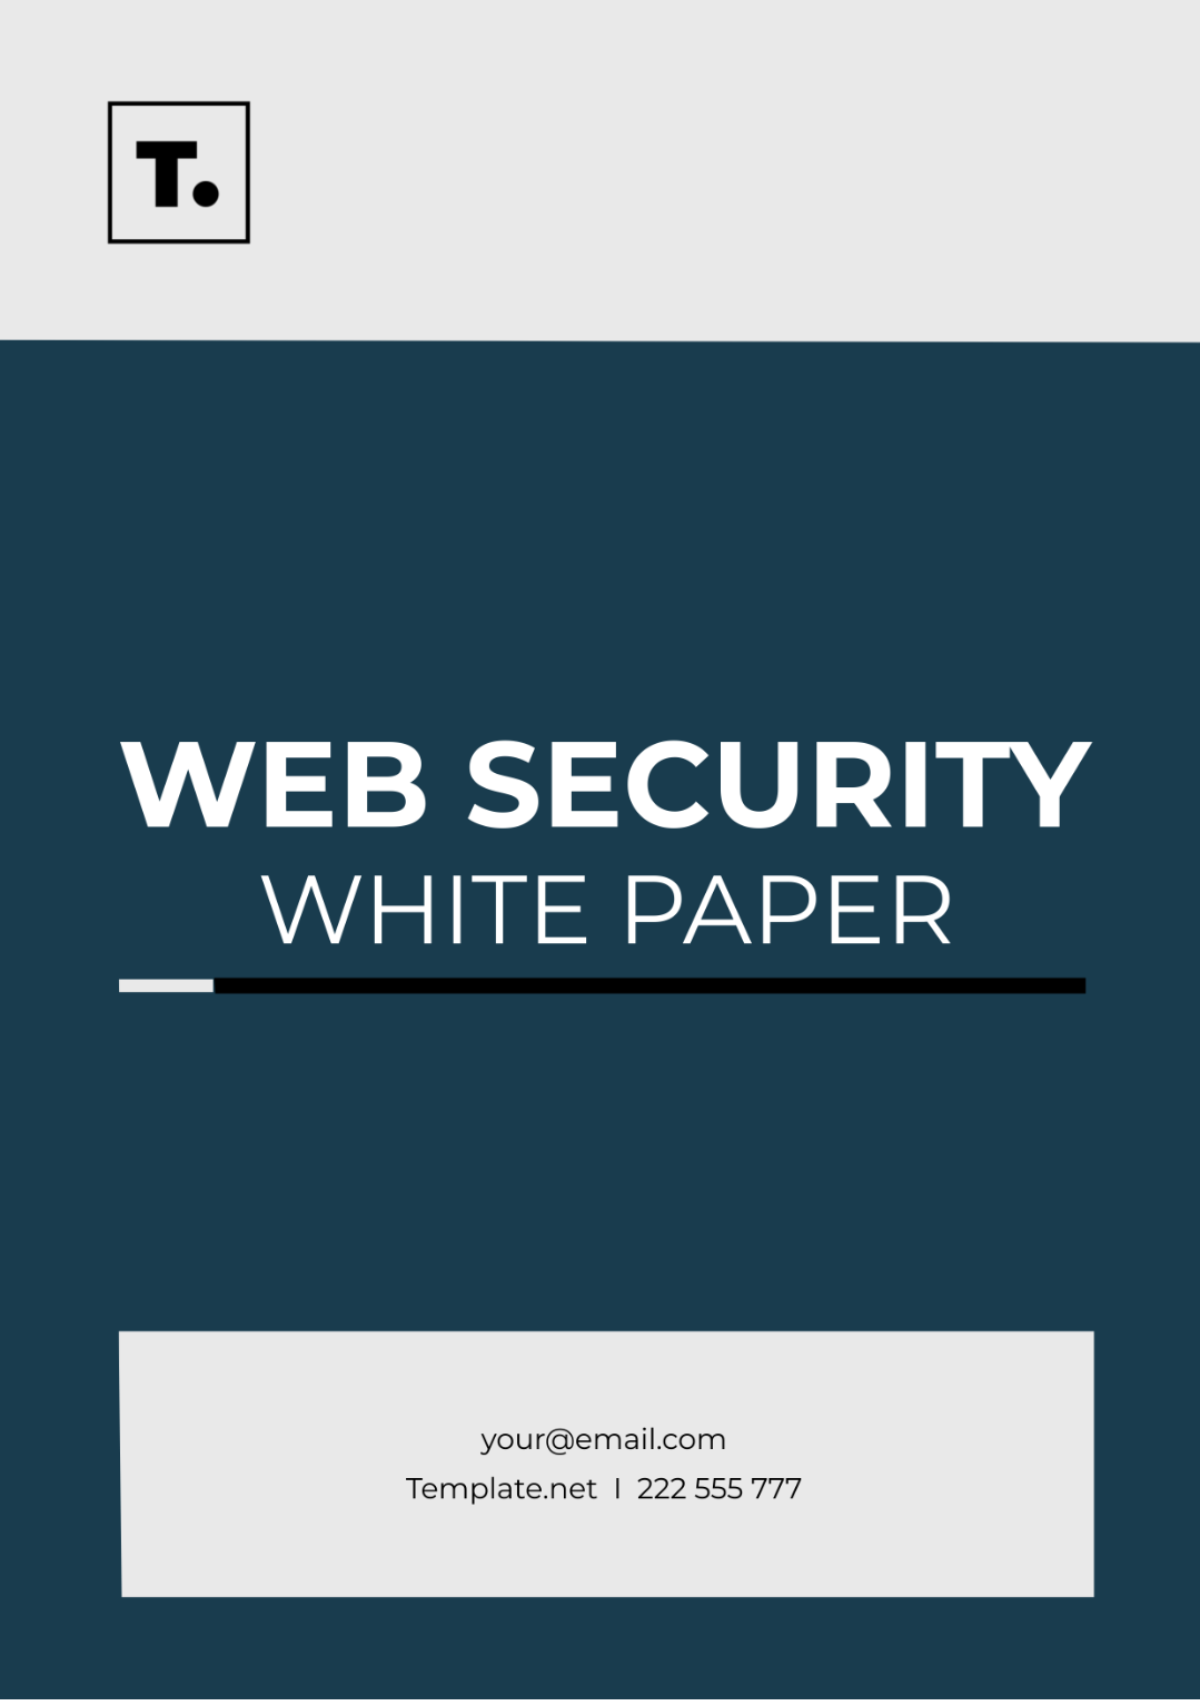 Web Security White Paper Template